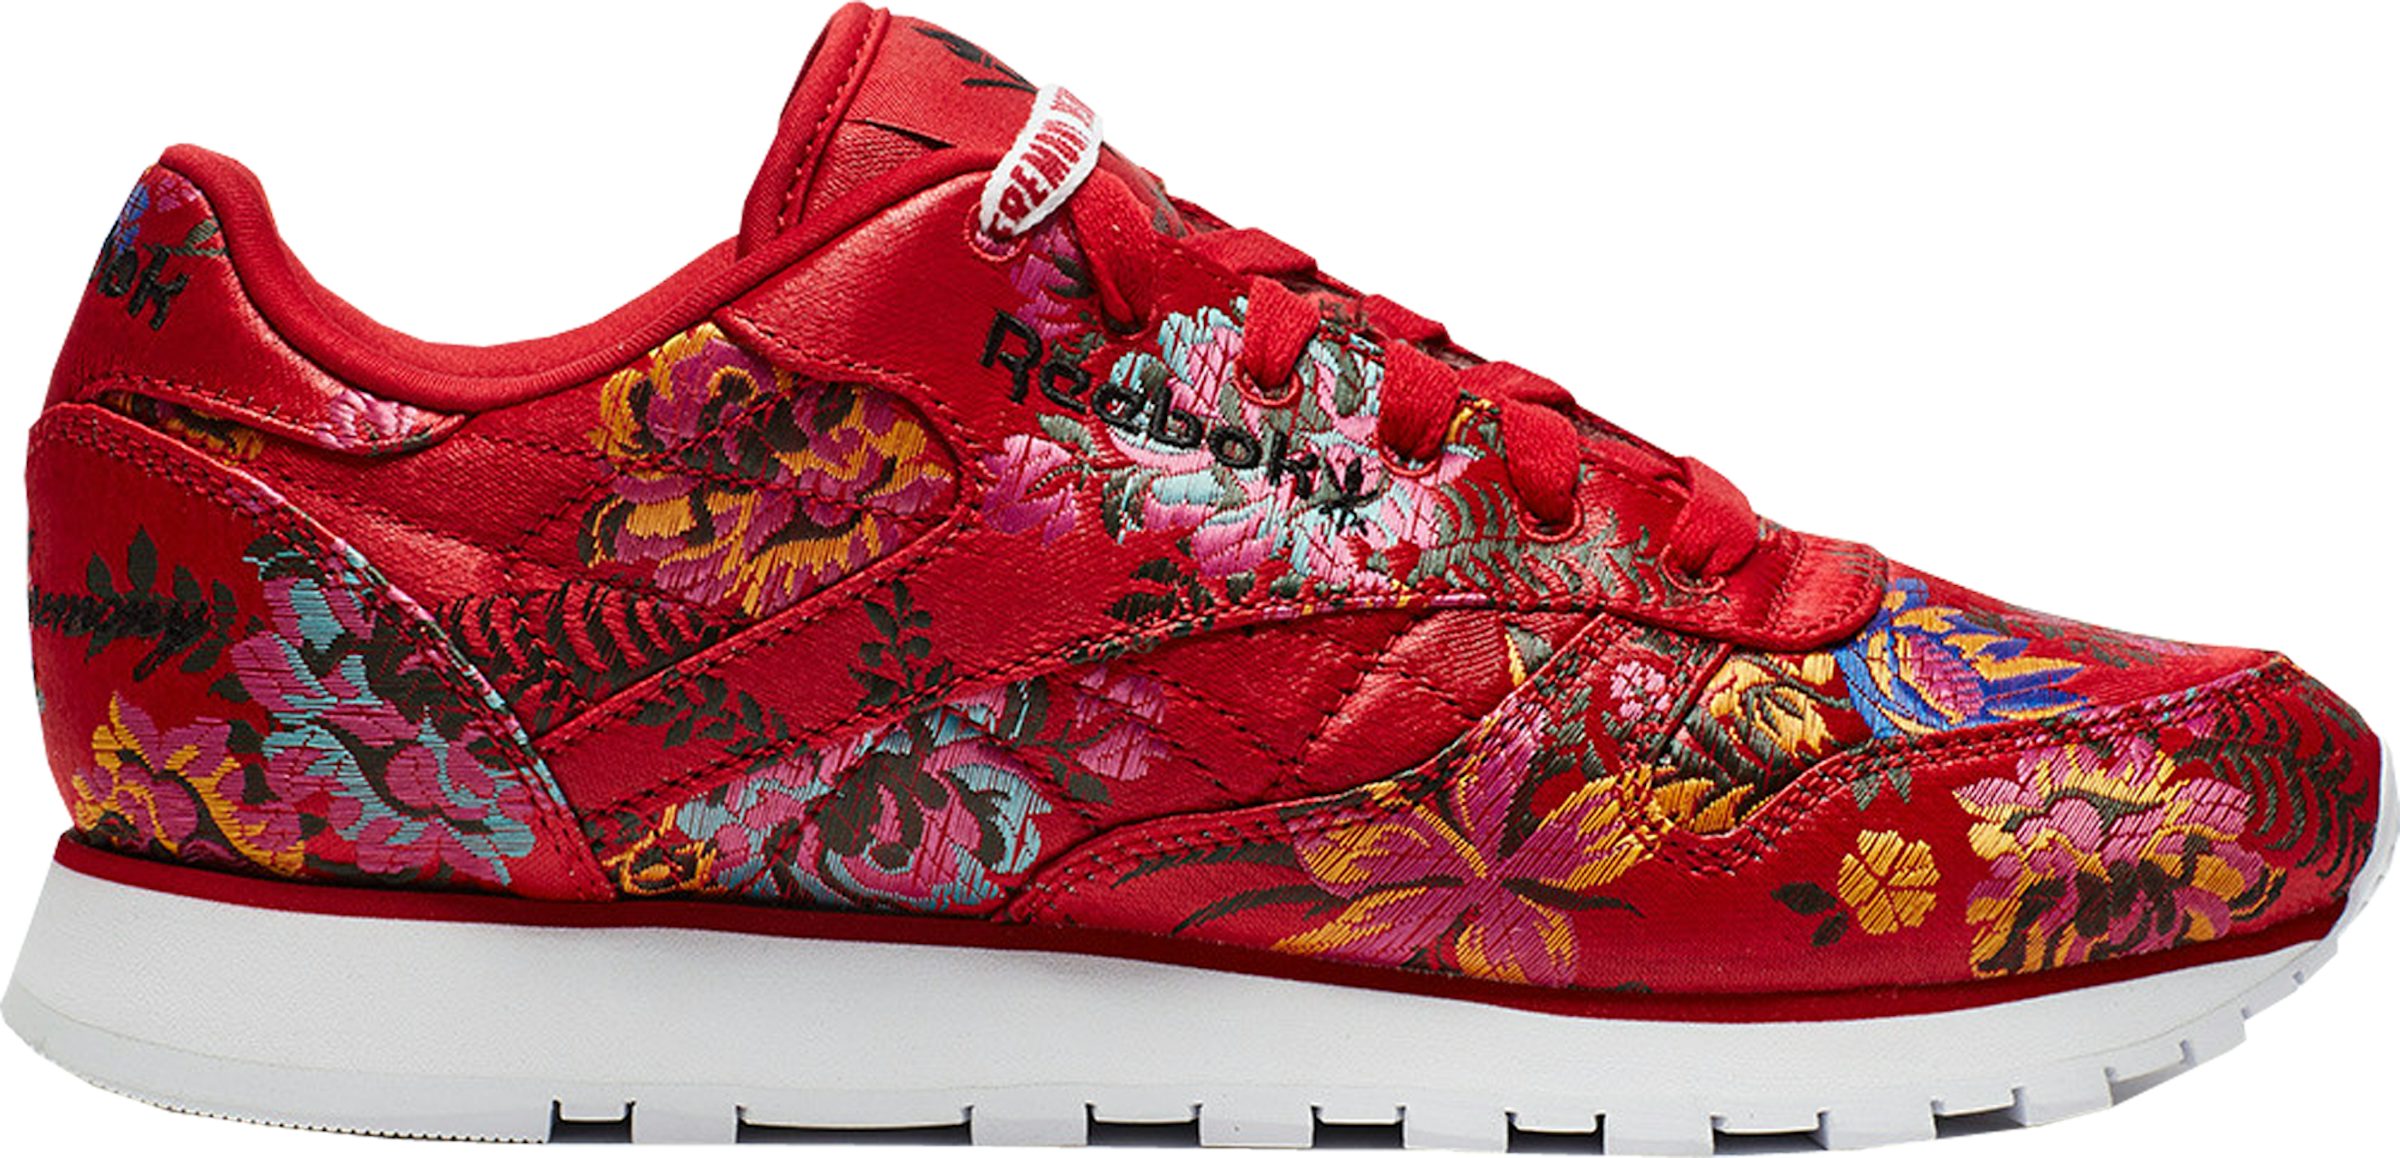 Glad in de buurt Nominaal Reebok Classic Leather Opening Ceremony Floral Satin Red Men's - - US